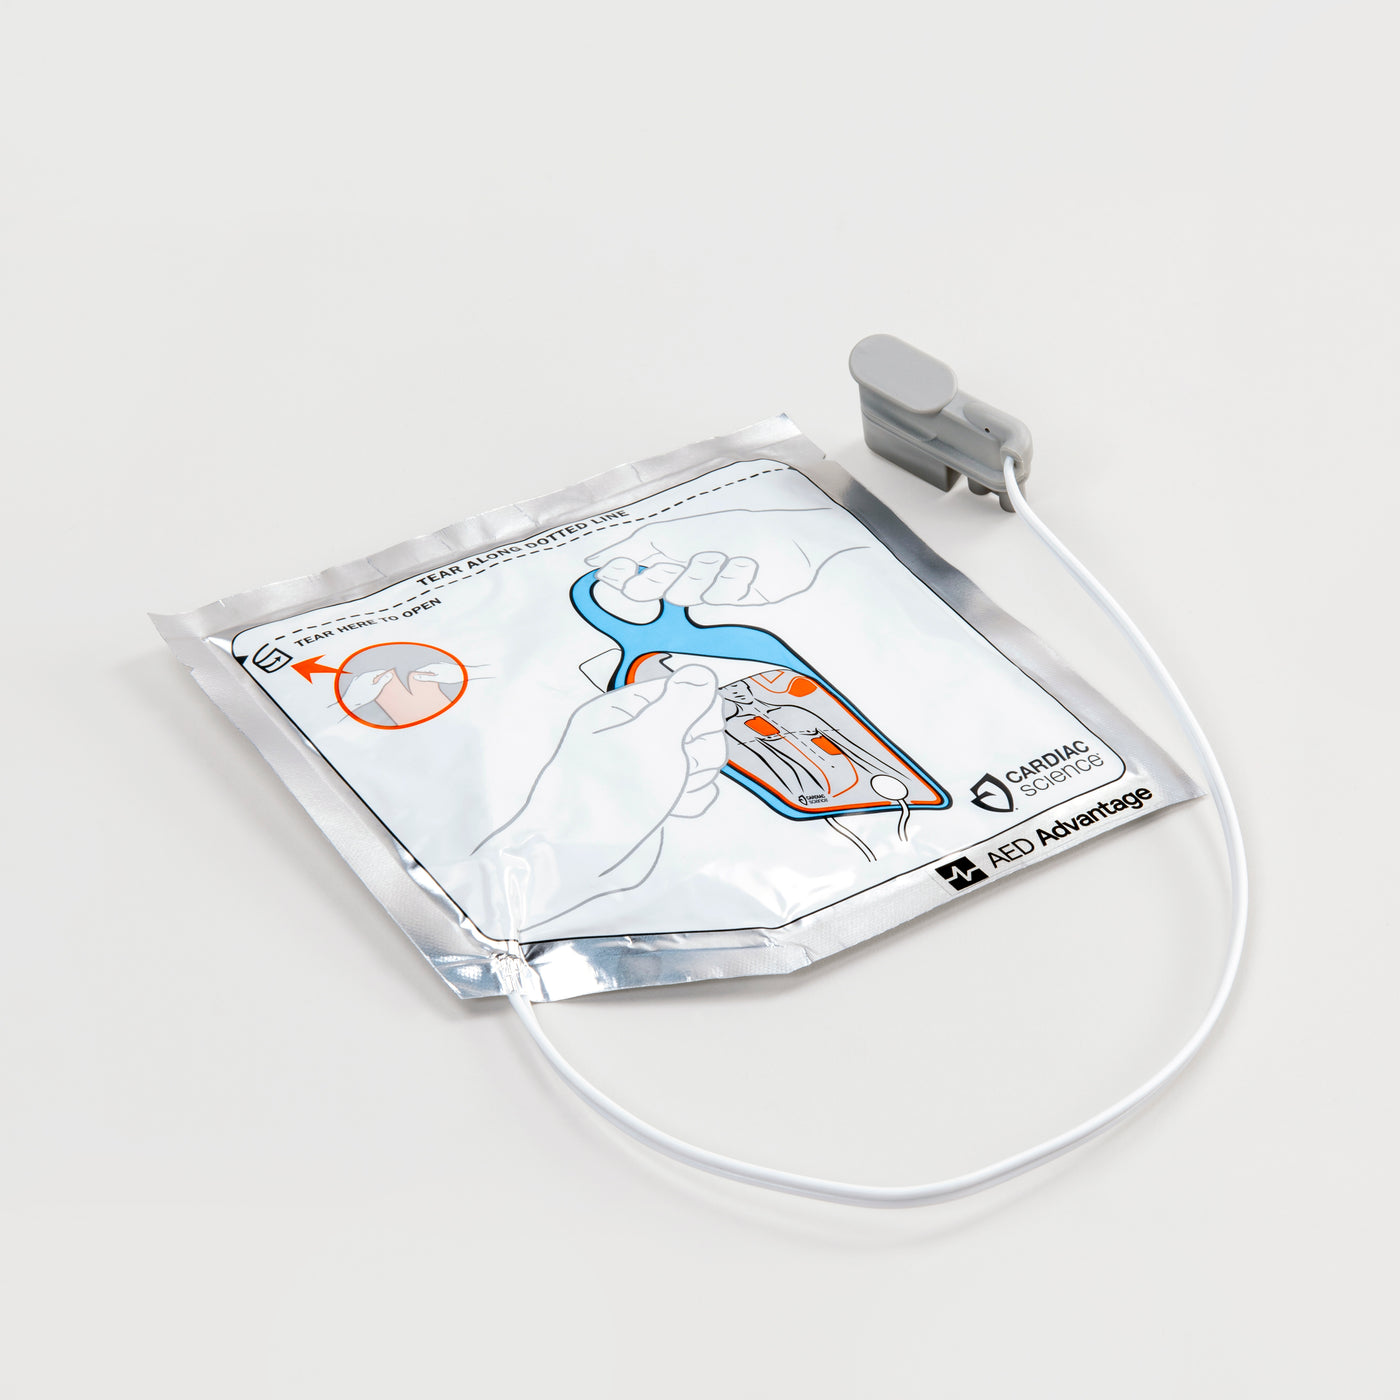 A white and silver square foil package containing adult electrodes for the Powerheart G5 defibrillator